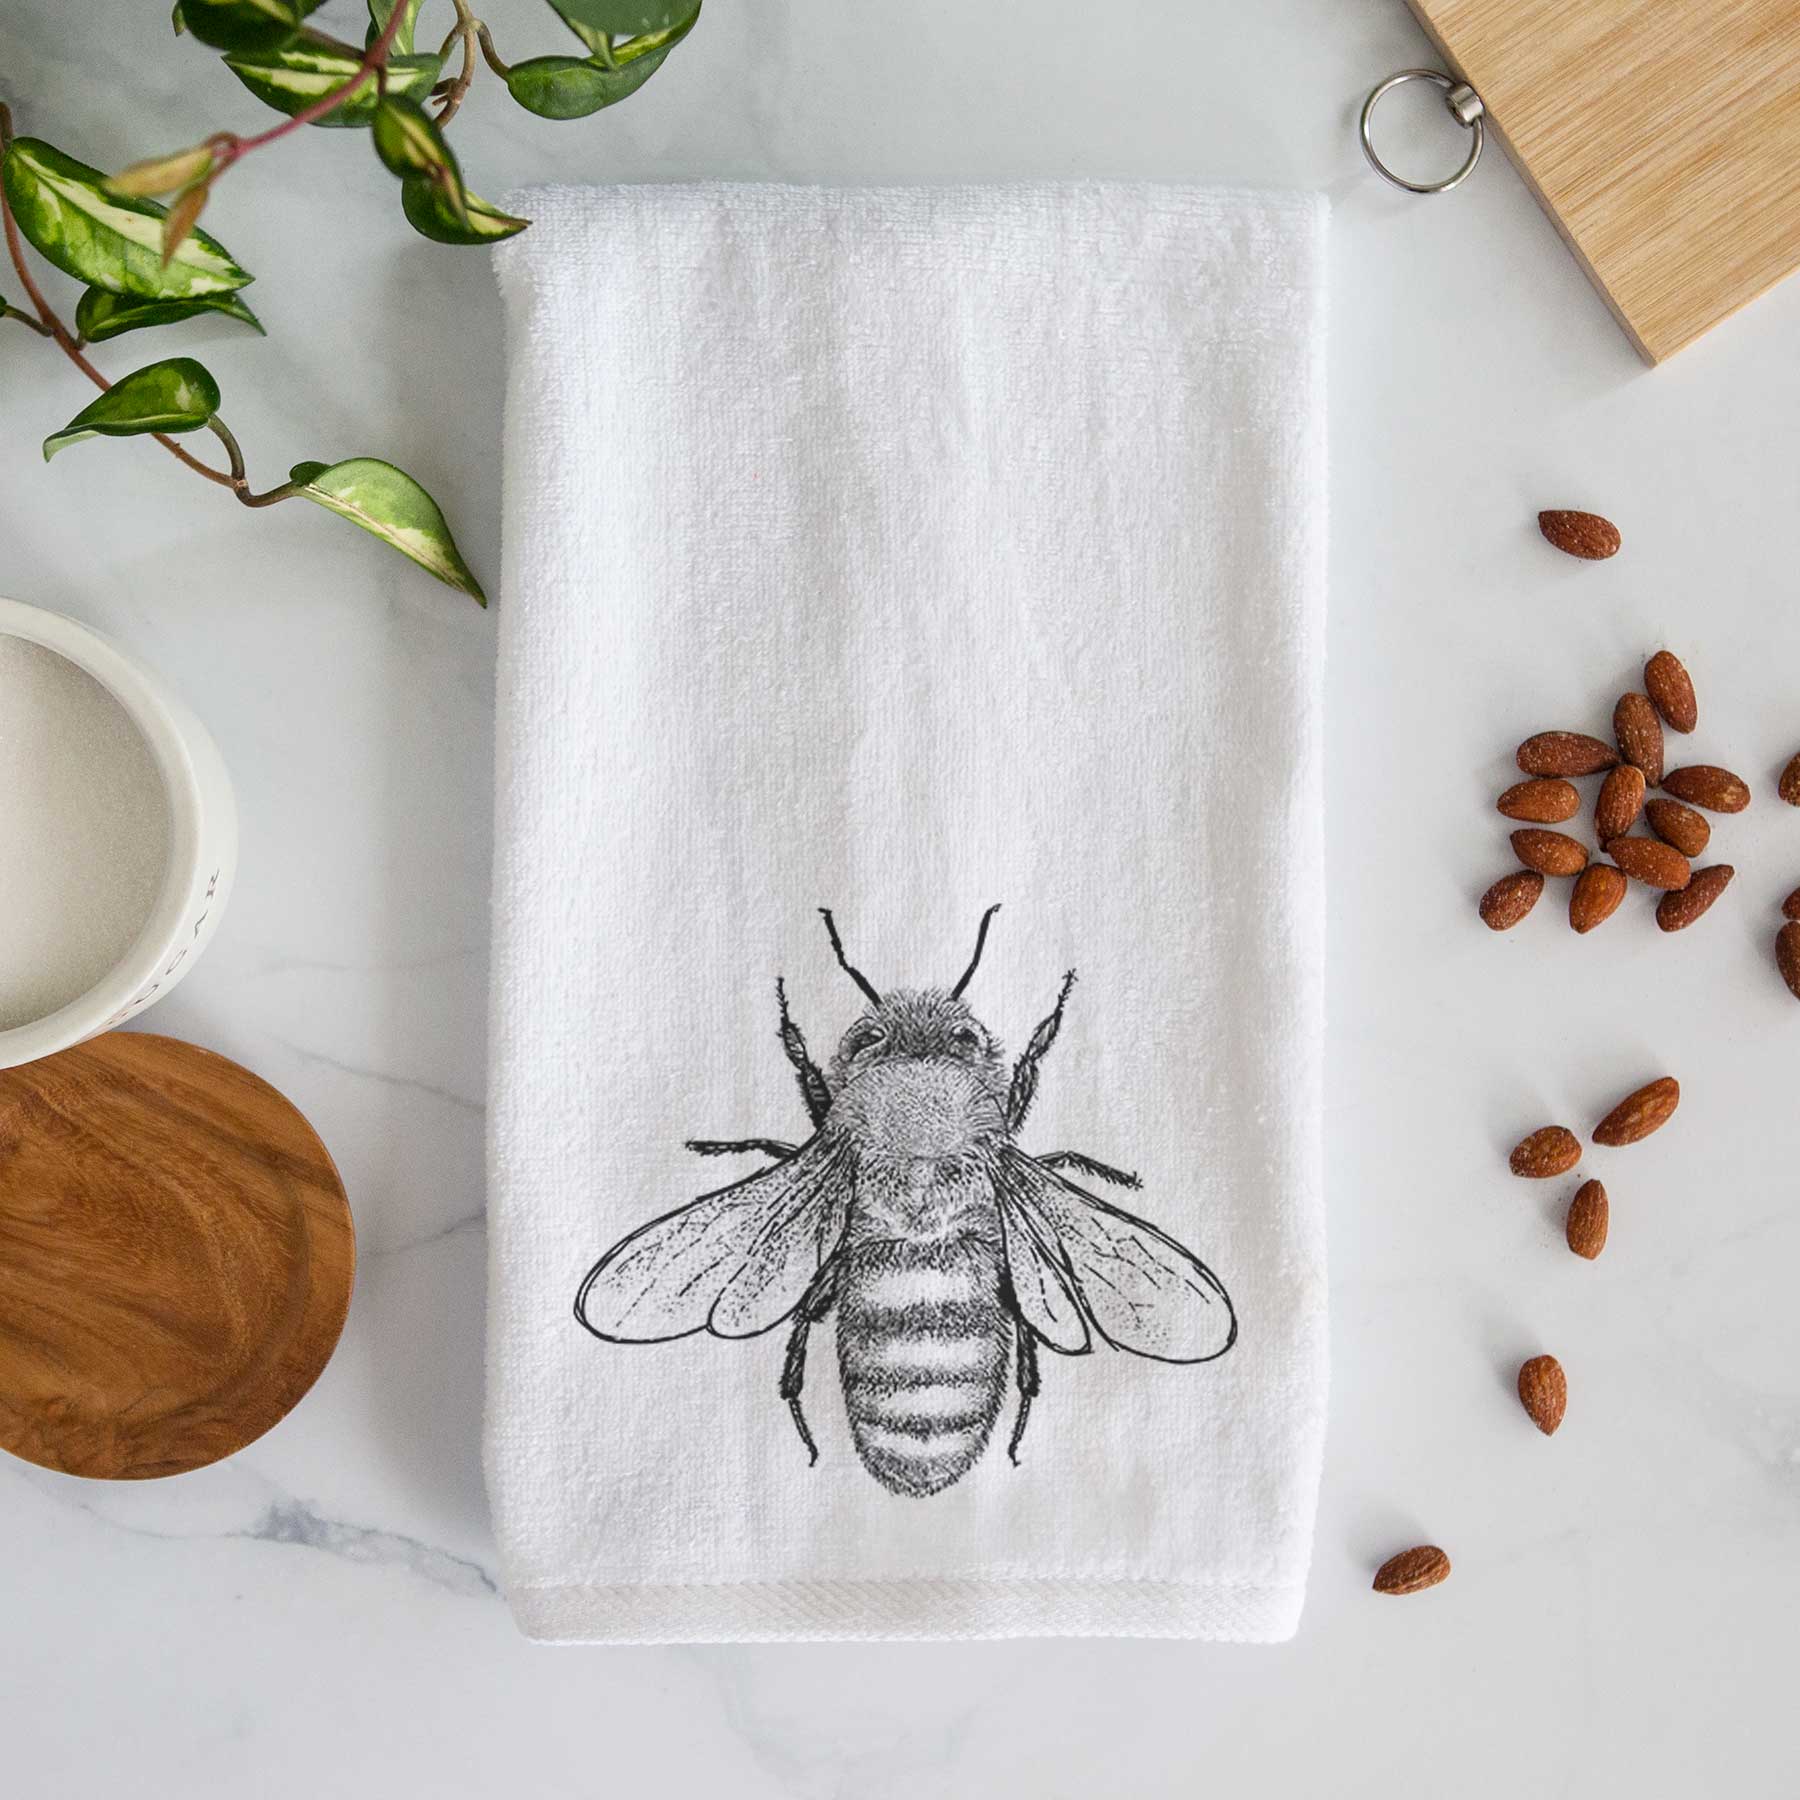  Bee Kind Be Brave Honey Cute Daisy Honey Bee Spring Summer Kitchen  Towels and Dishcloths,16 x 24 Inch Set of 2 Soft and Absorbent Hand Towels  Tea Towels Dish Towels Sets,Gifts